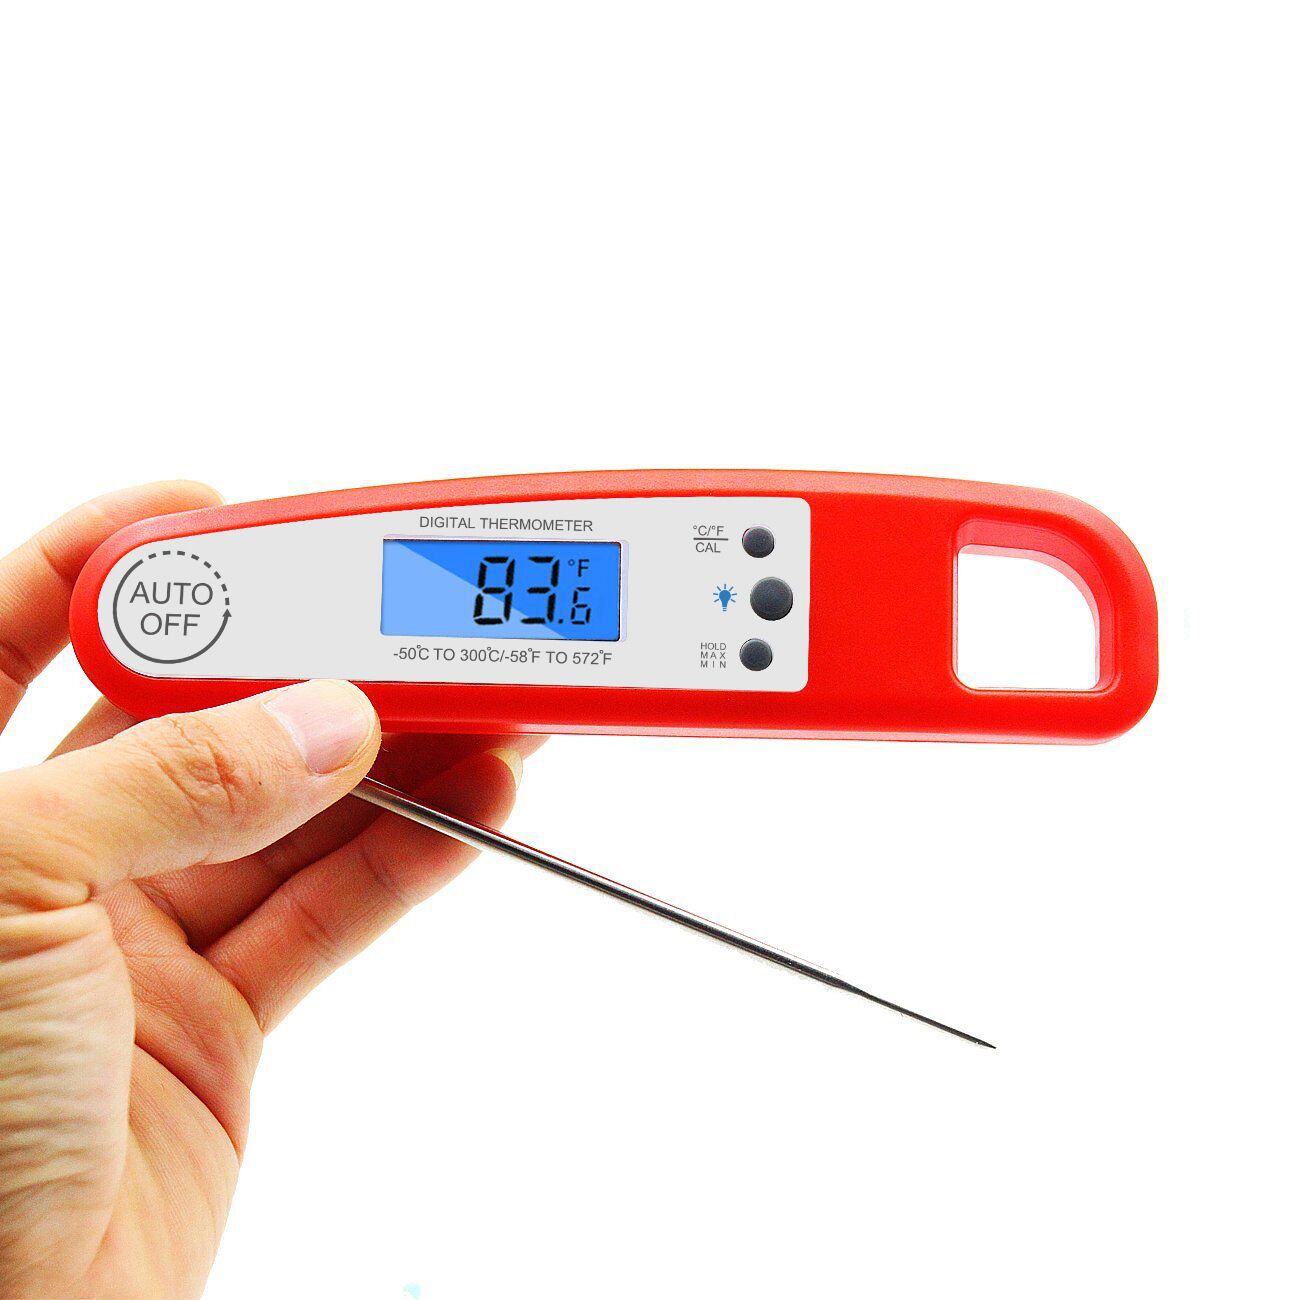 2019 Version Digital Meat Thermometer for Grill and Cooking, 2S Best Super Fast Instant Read Waterproof Kitchen Thermometer